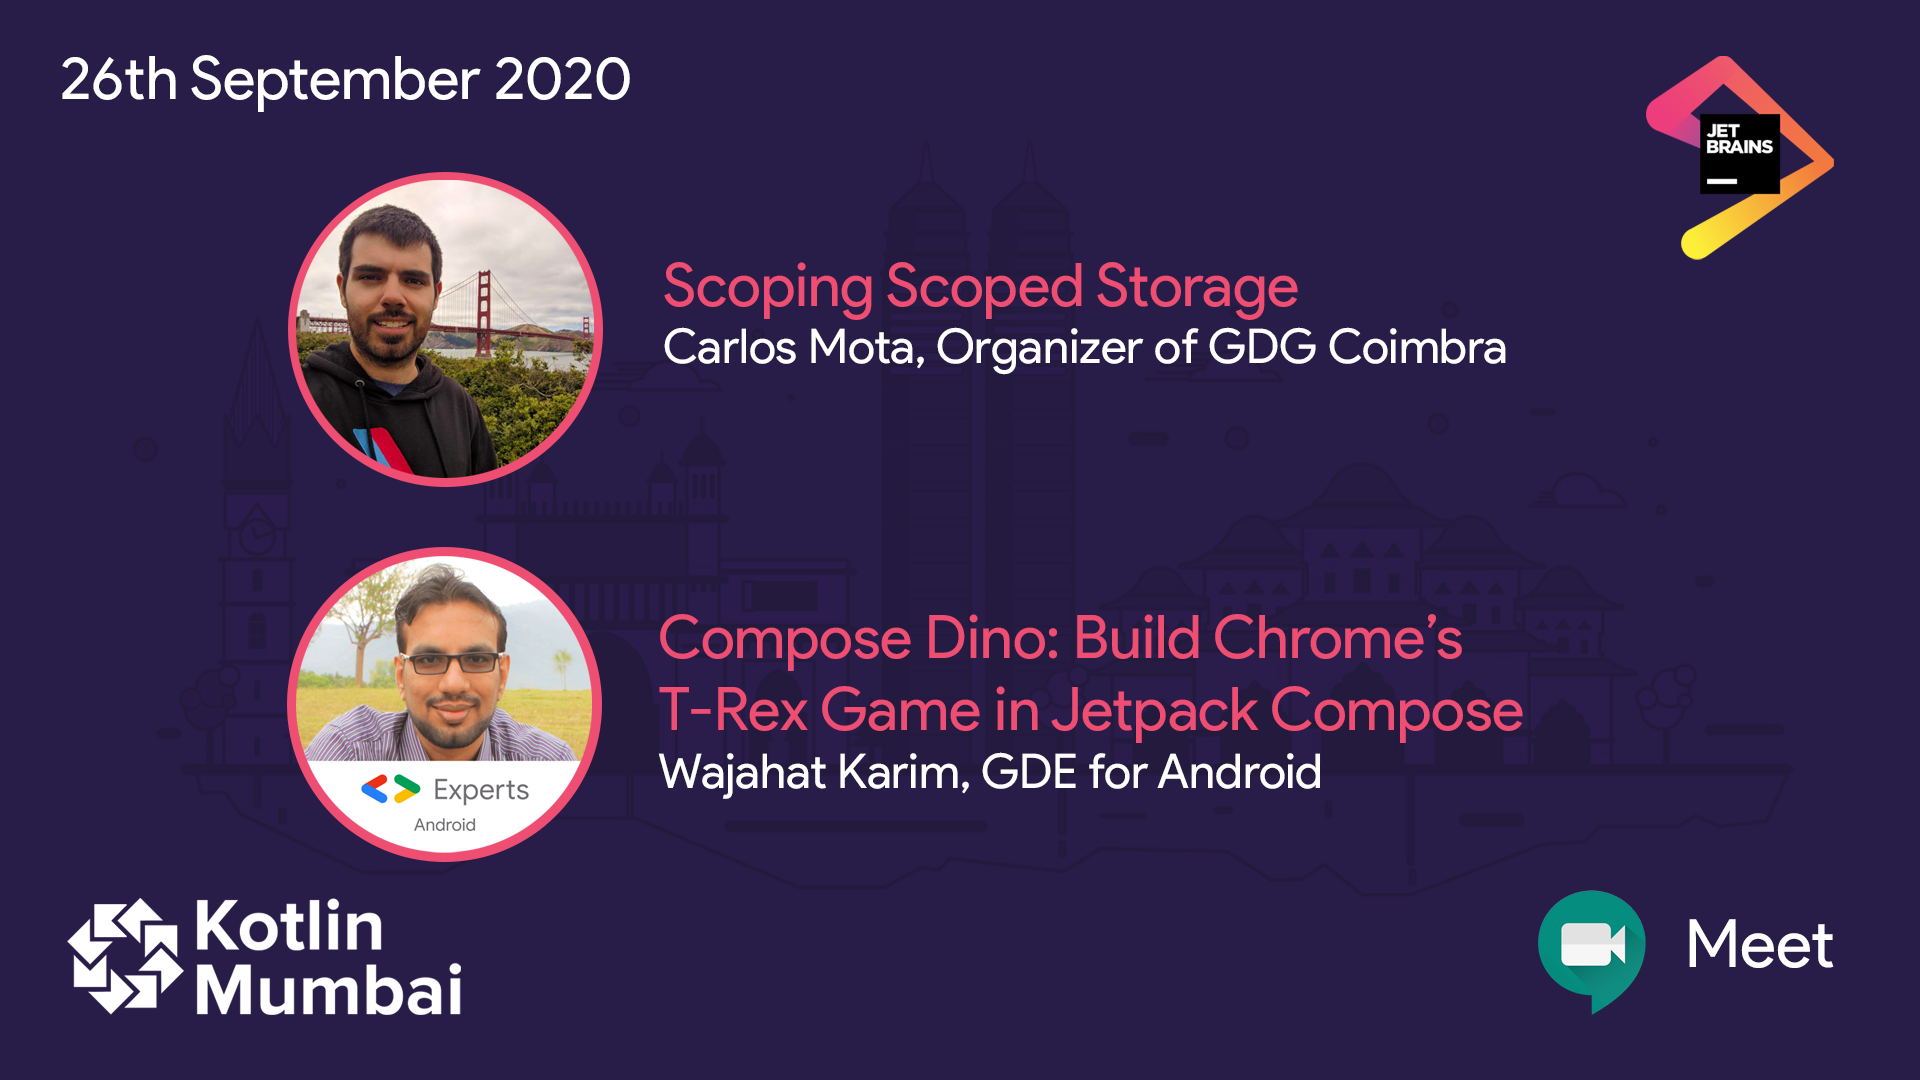 Carlos Mota talks about scoped storage and Wajahat Karim, GDE for Android talks about game development with Jetpack Compse on Android